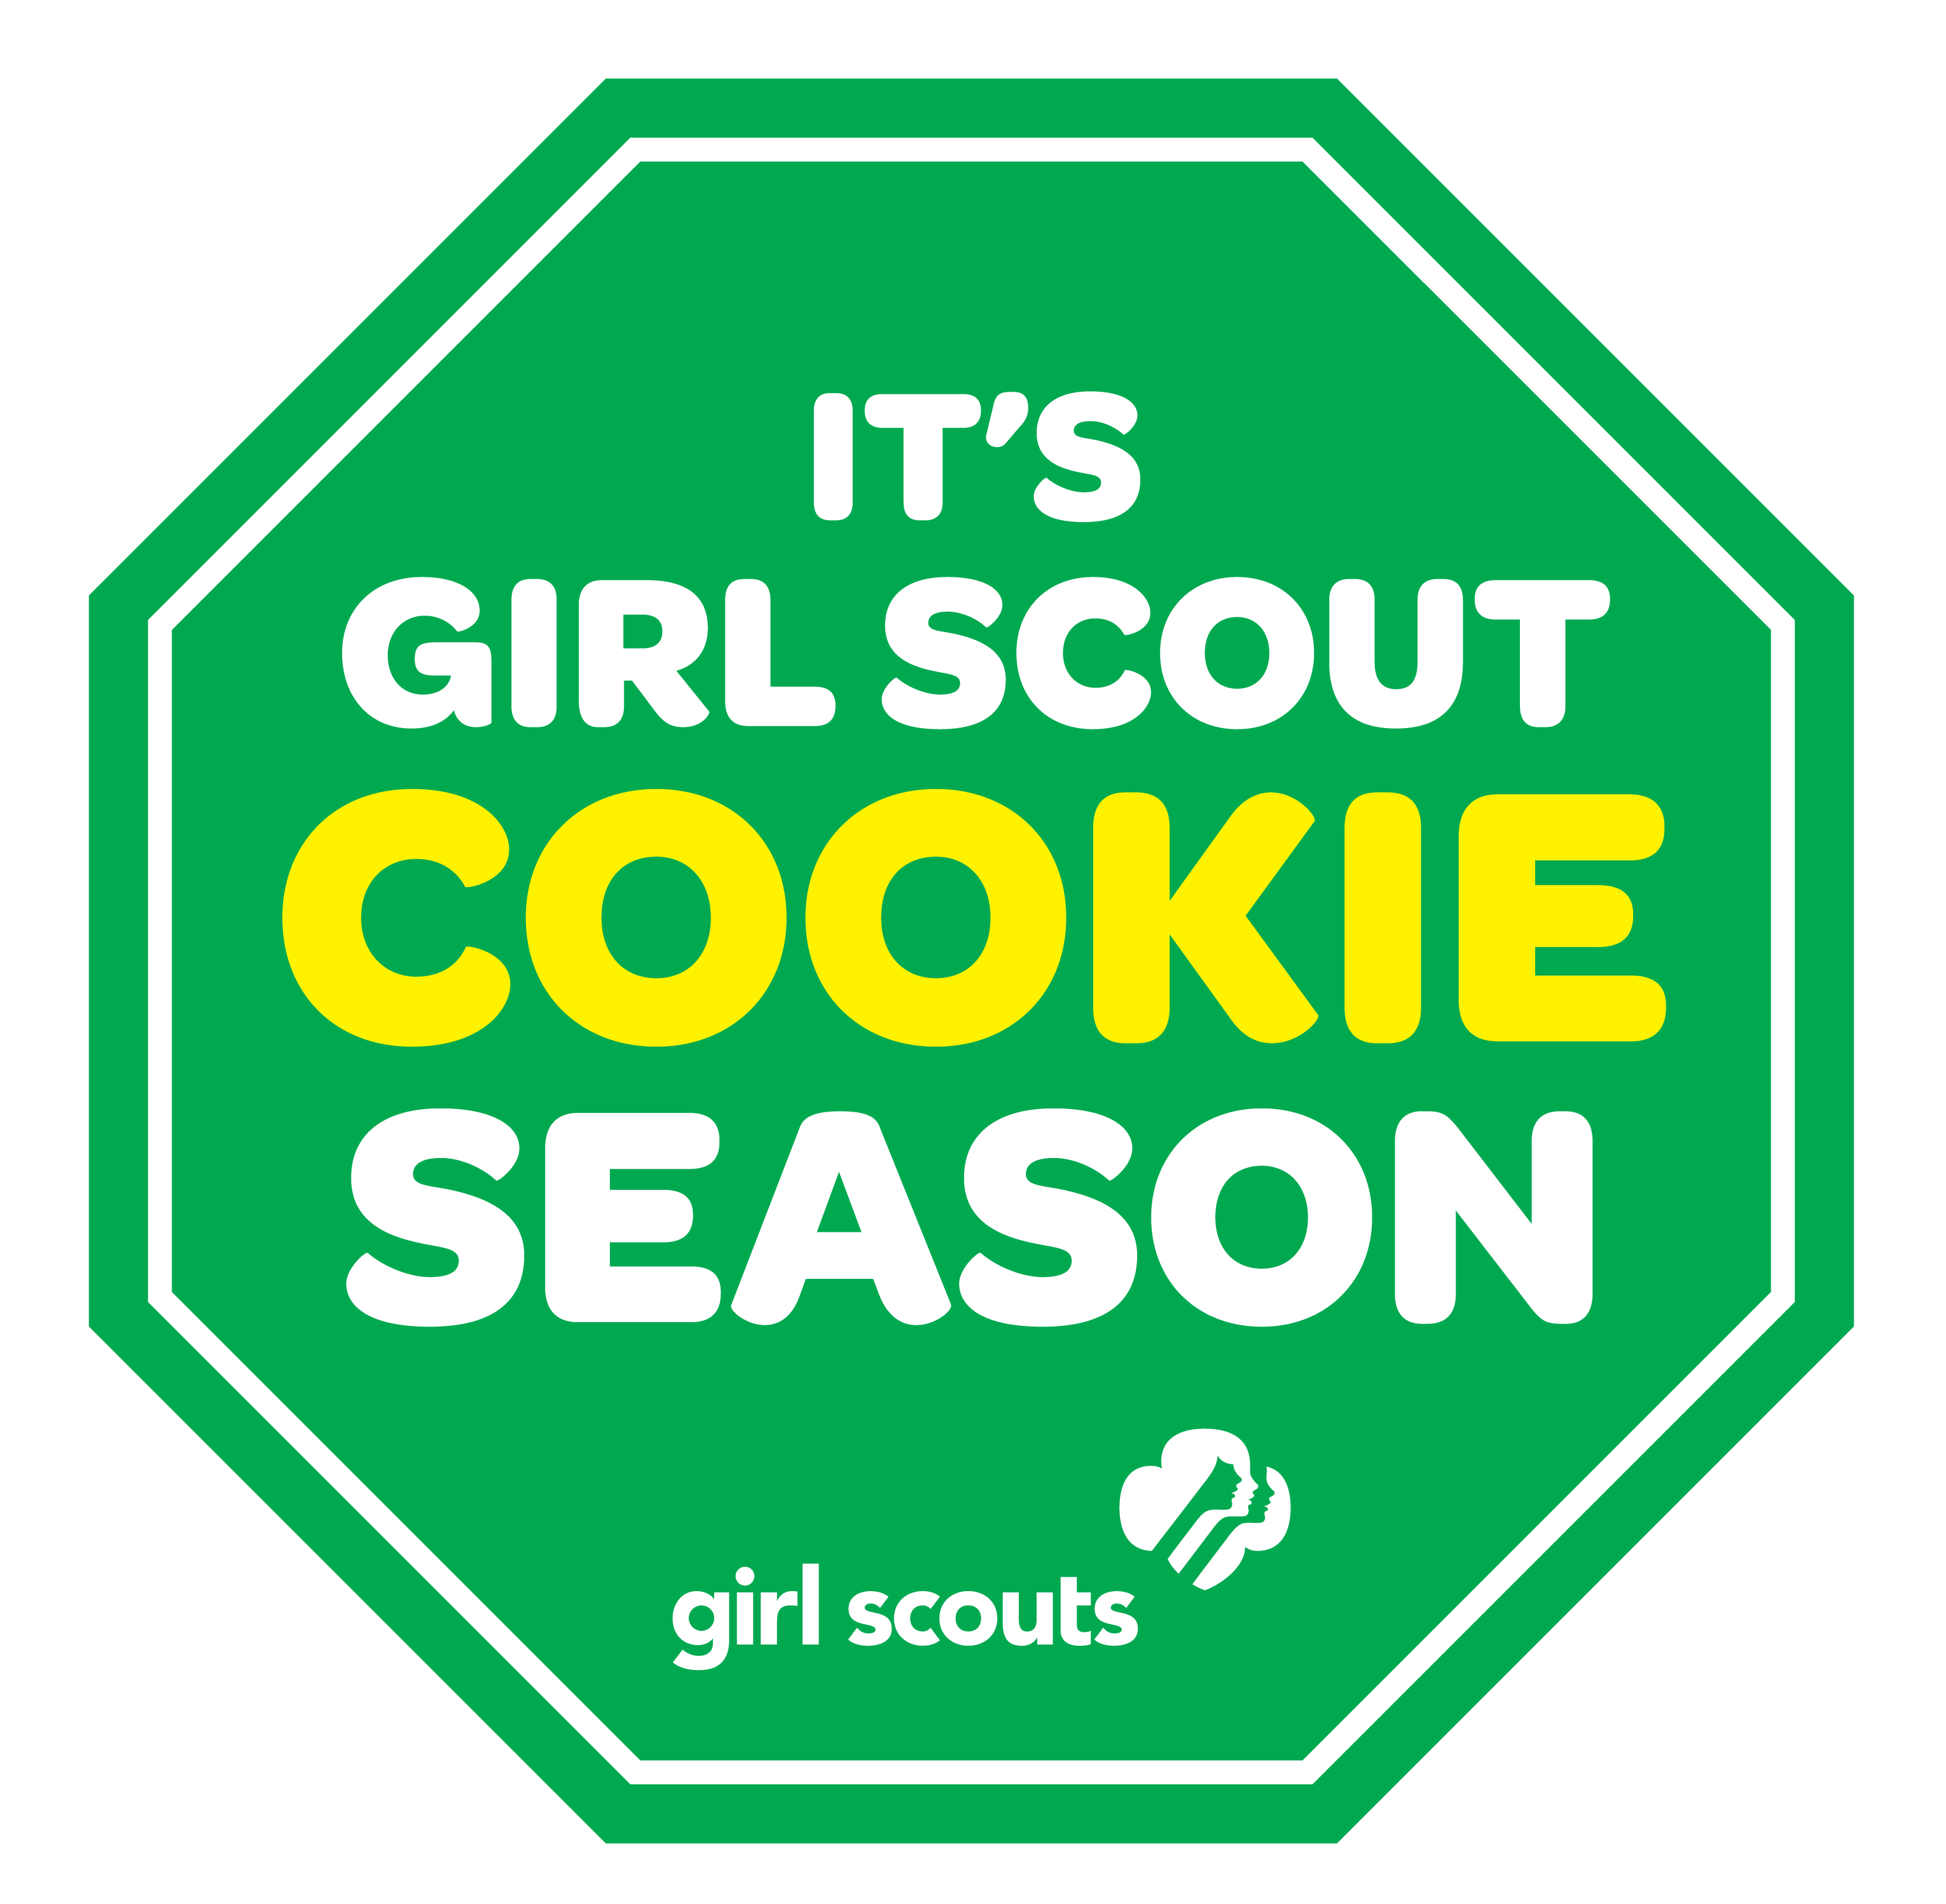 clip art for girl scouts - photo #35